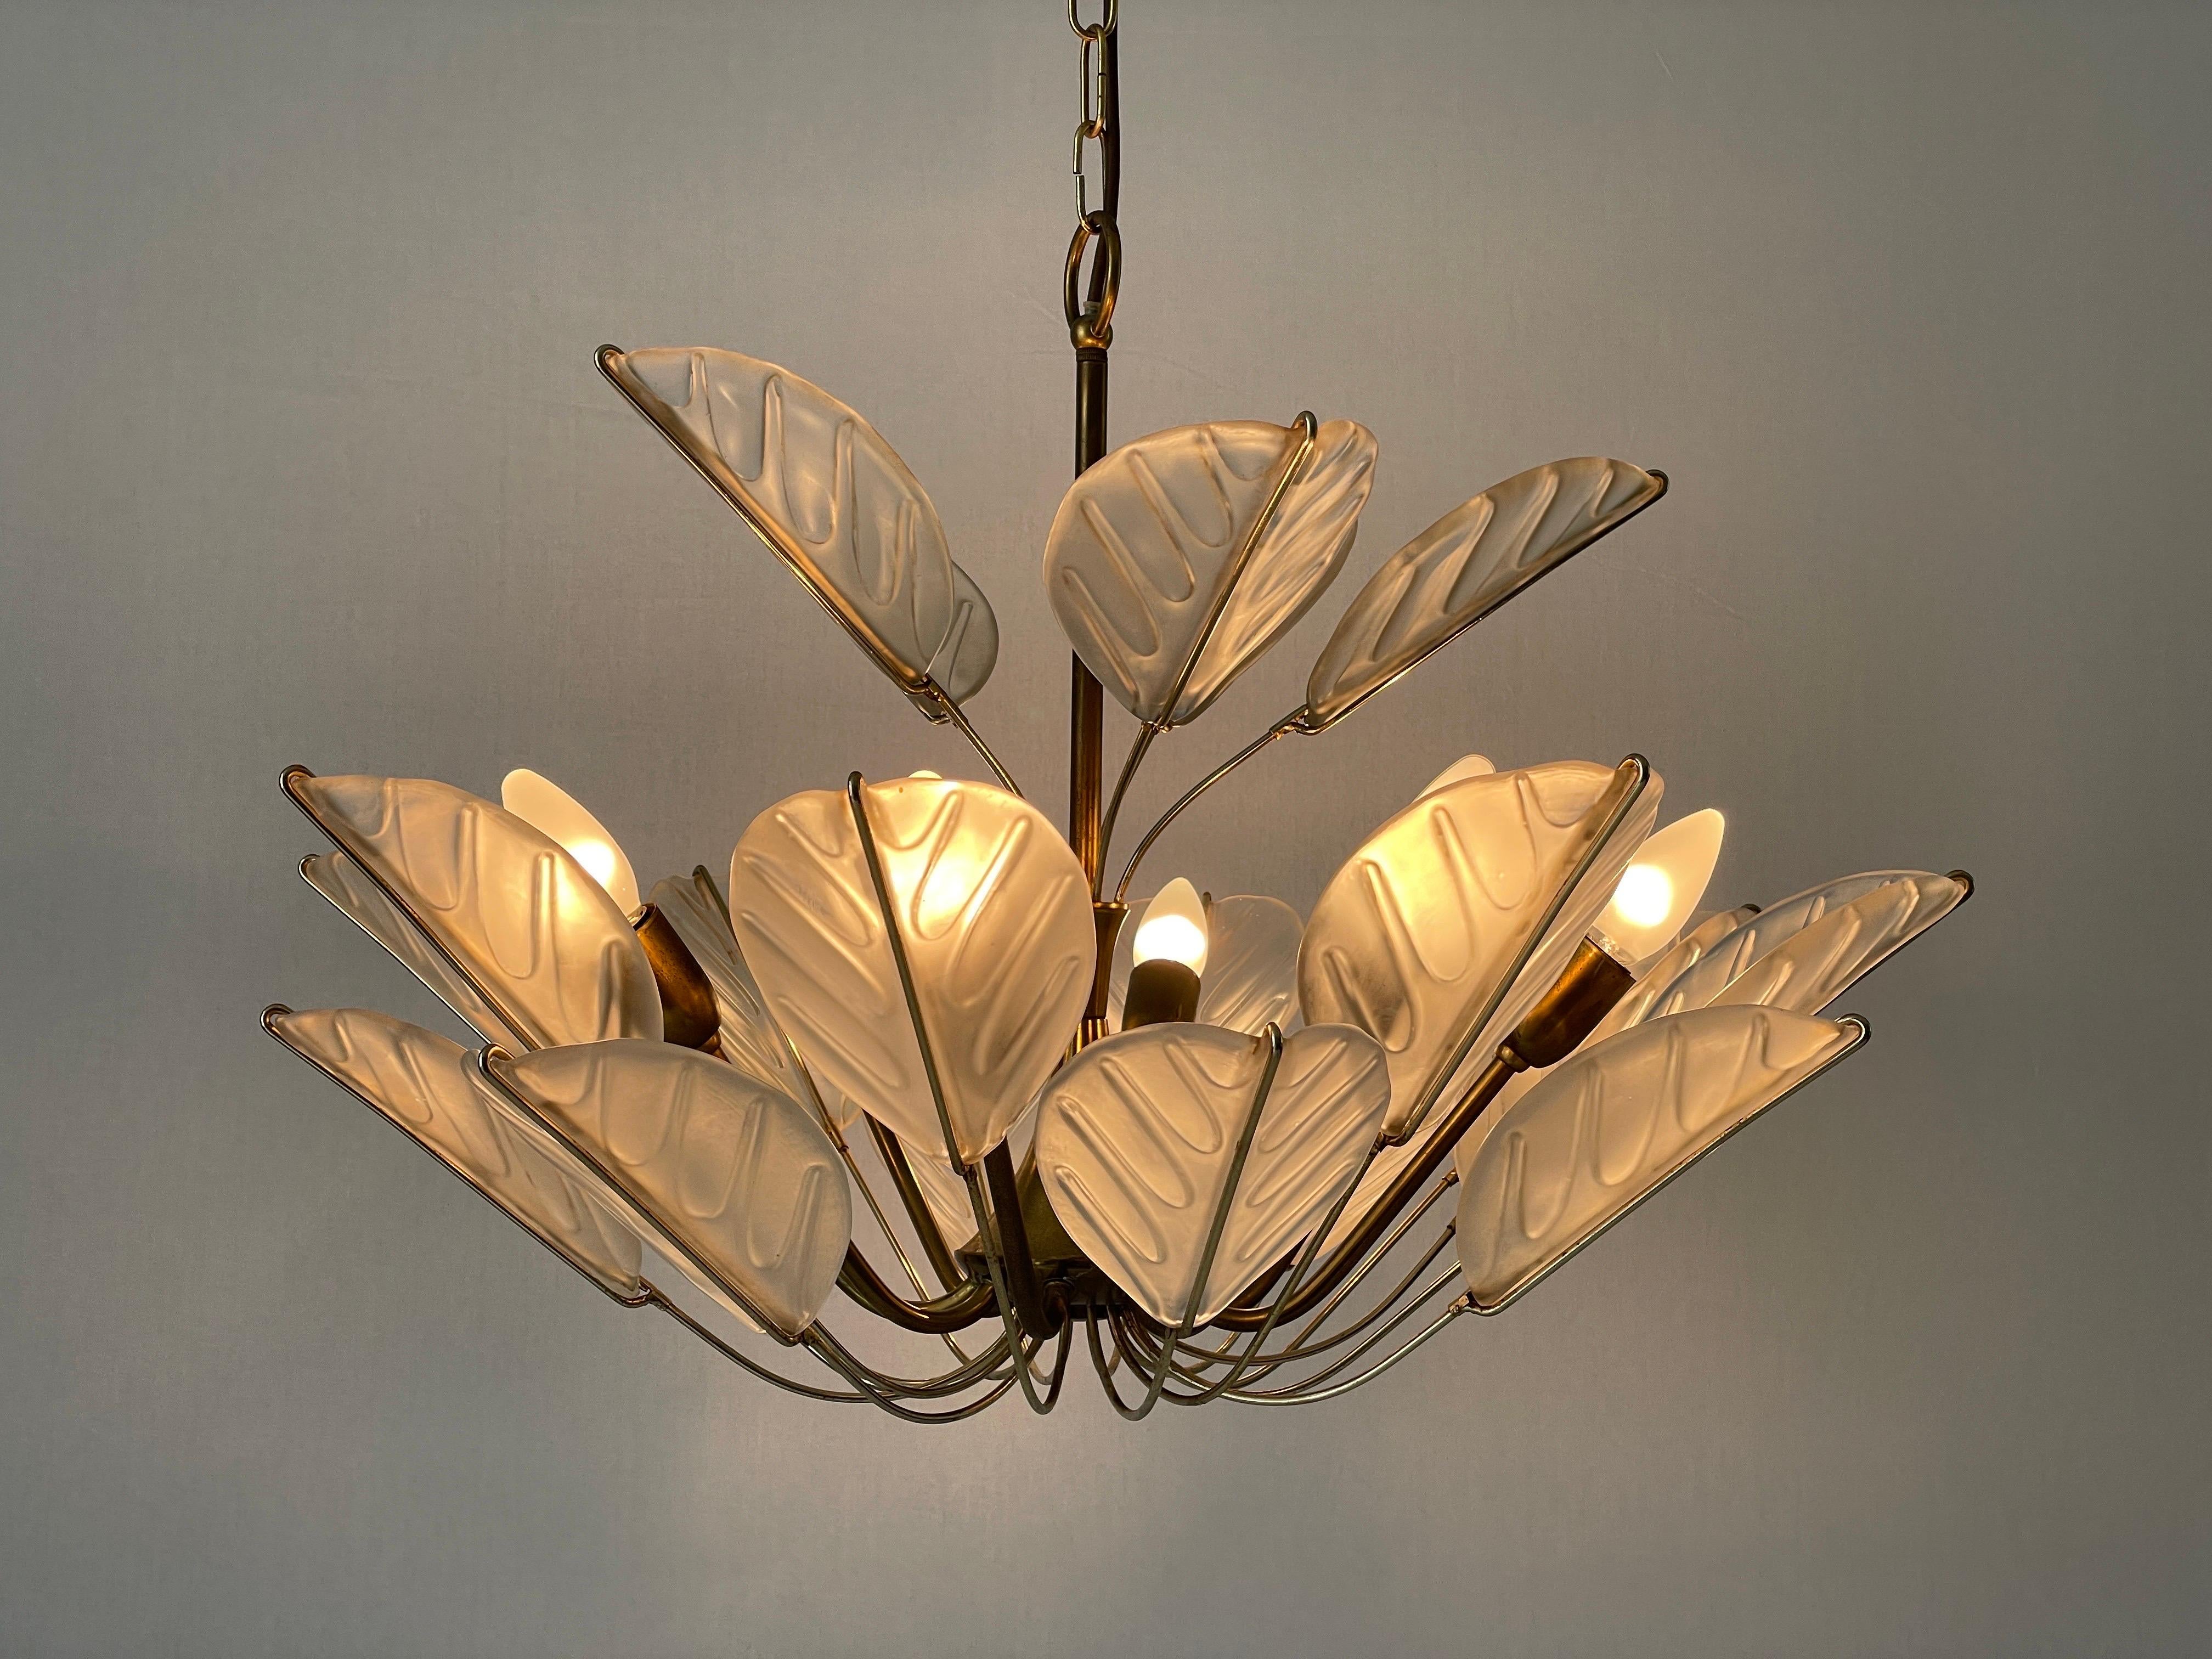 Luxurious 8-armed Brass Chandelier with Crystal Glass Leaves, 1960s, Germany For Sale 5